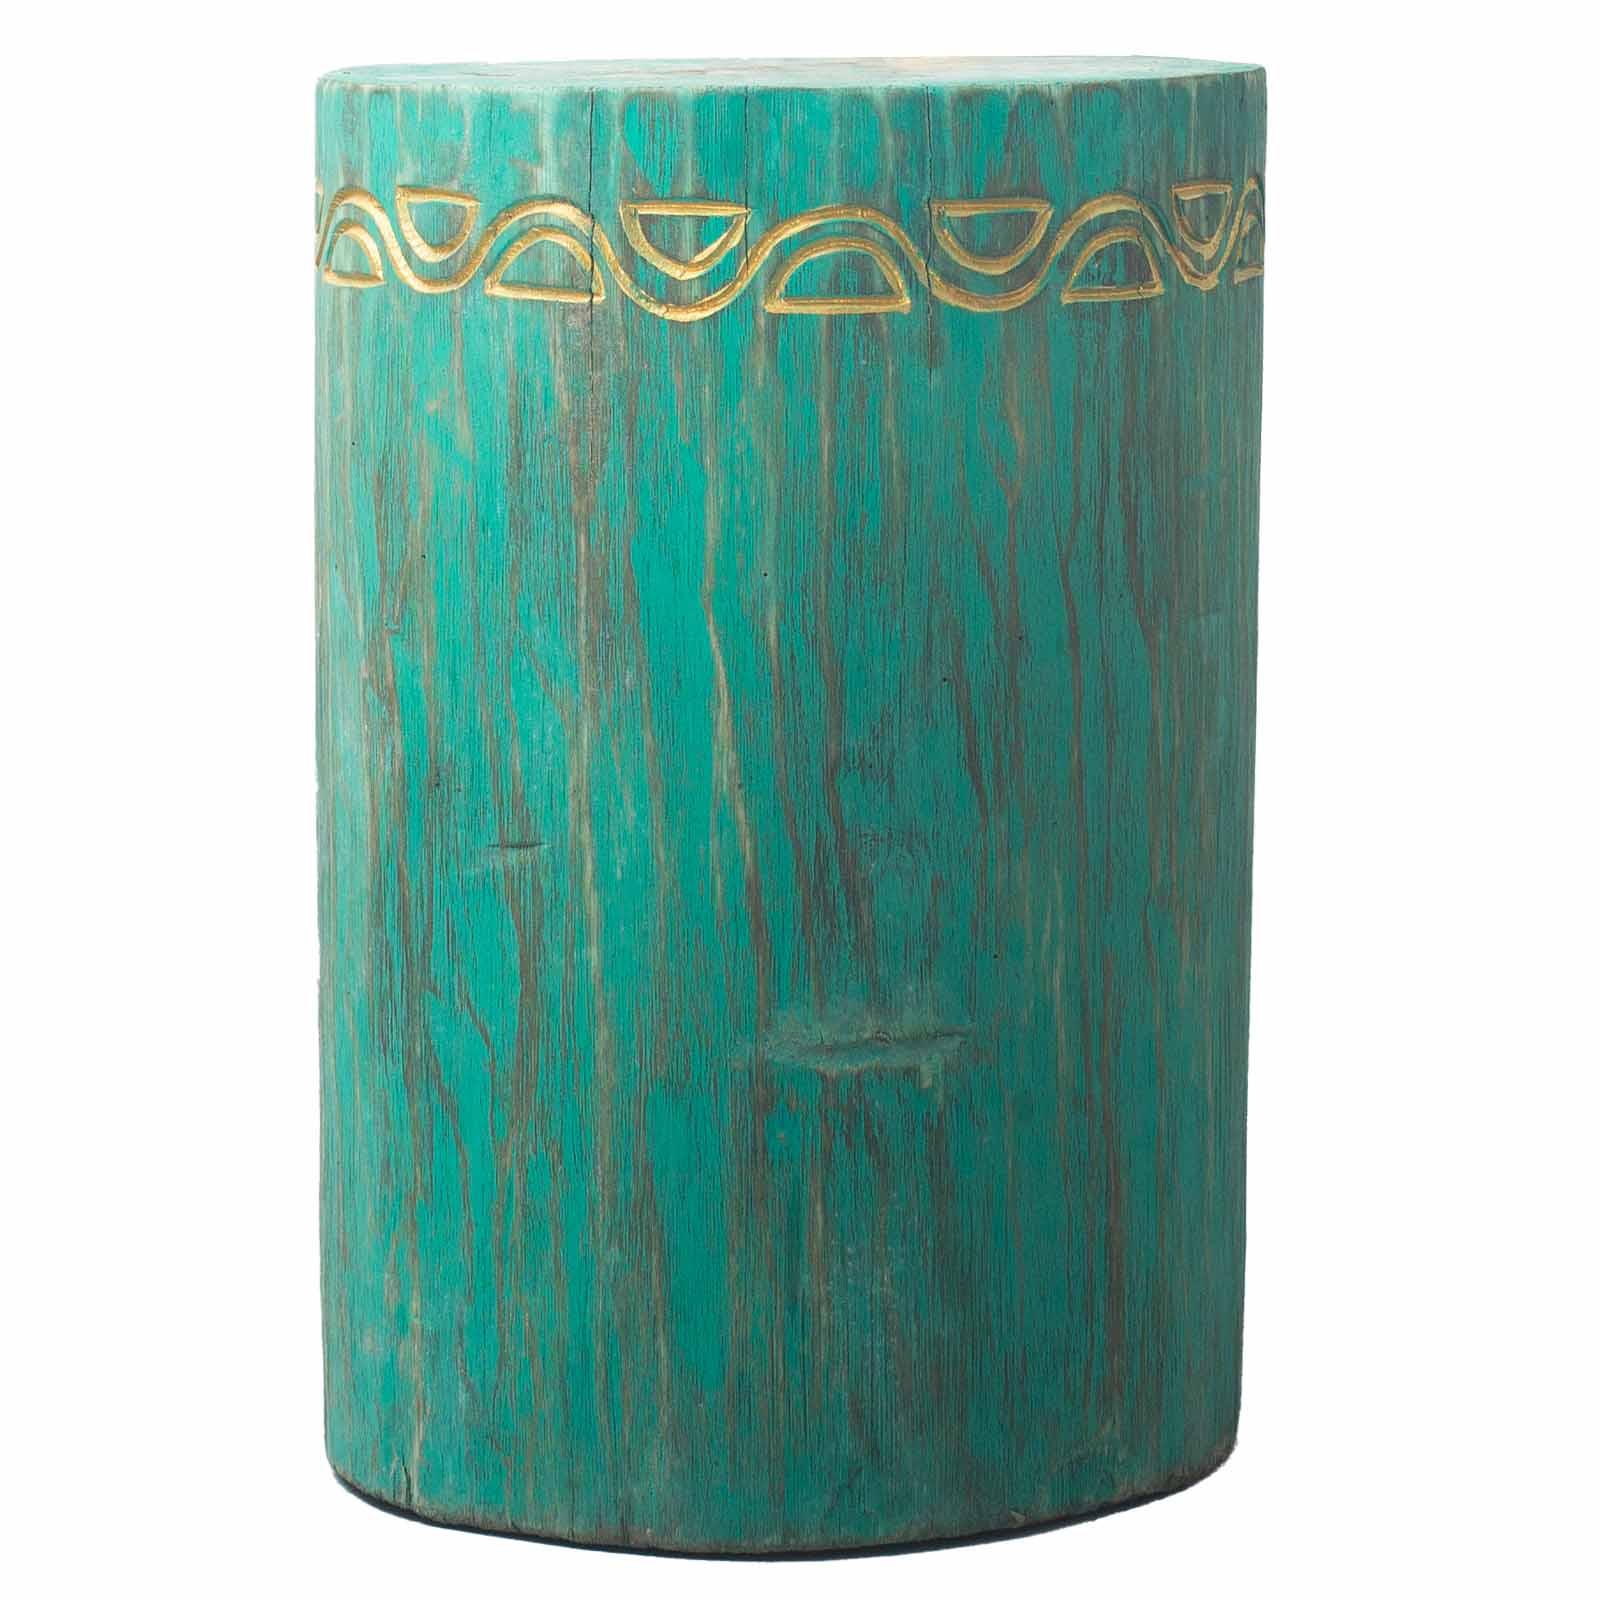 Wooden Stool - Tribal Design - Handmade - Turquoise Table - Charming Spaces